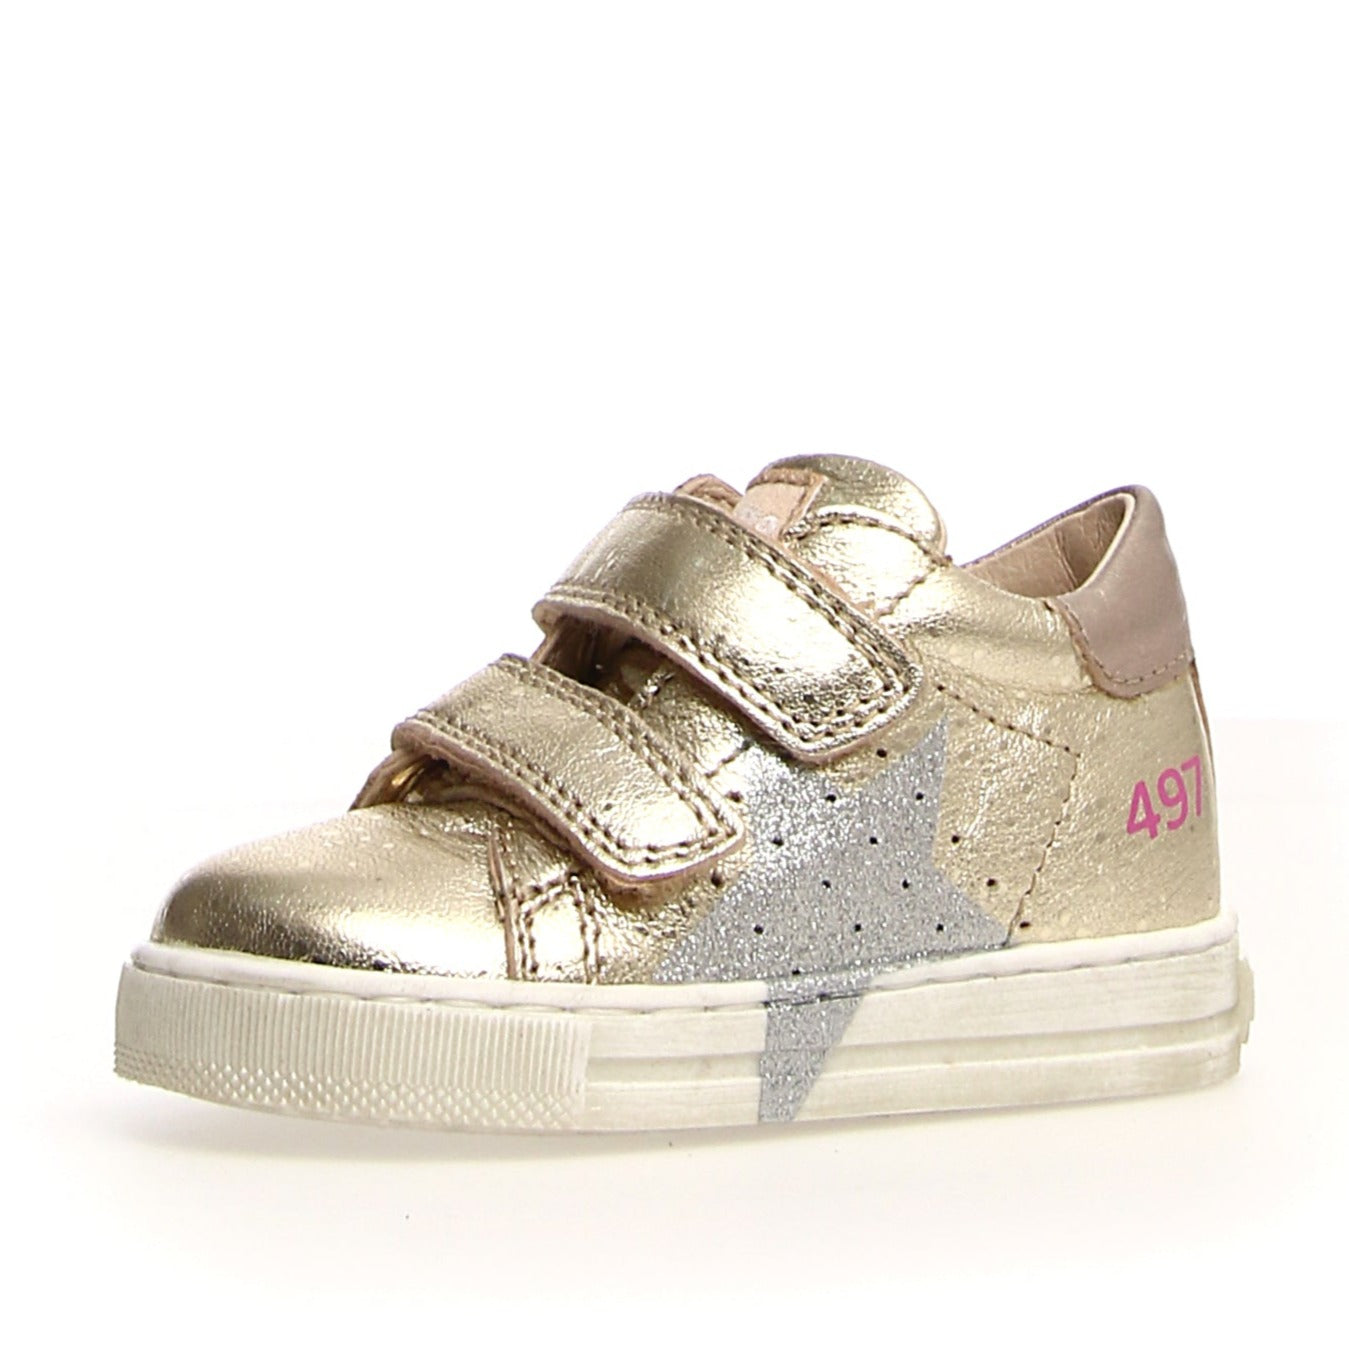 Naturino Dorrie VL Leather and Glitter Sneakers